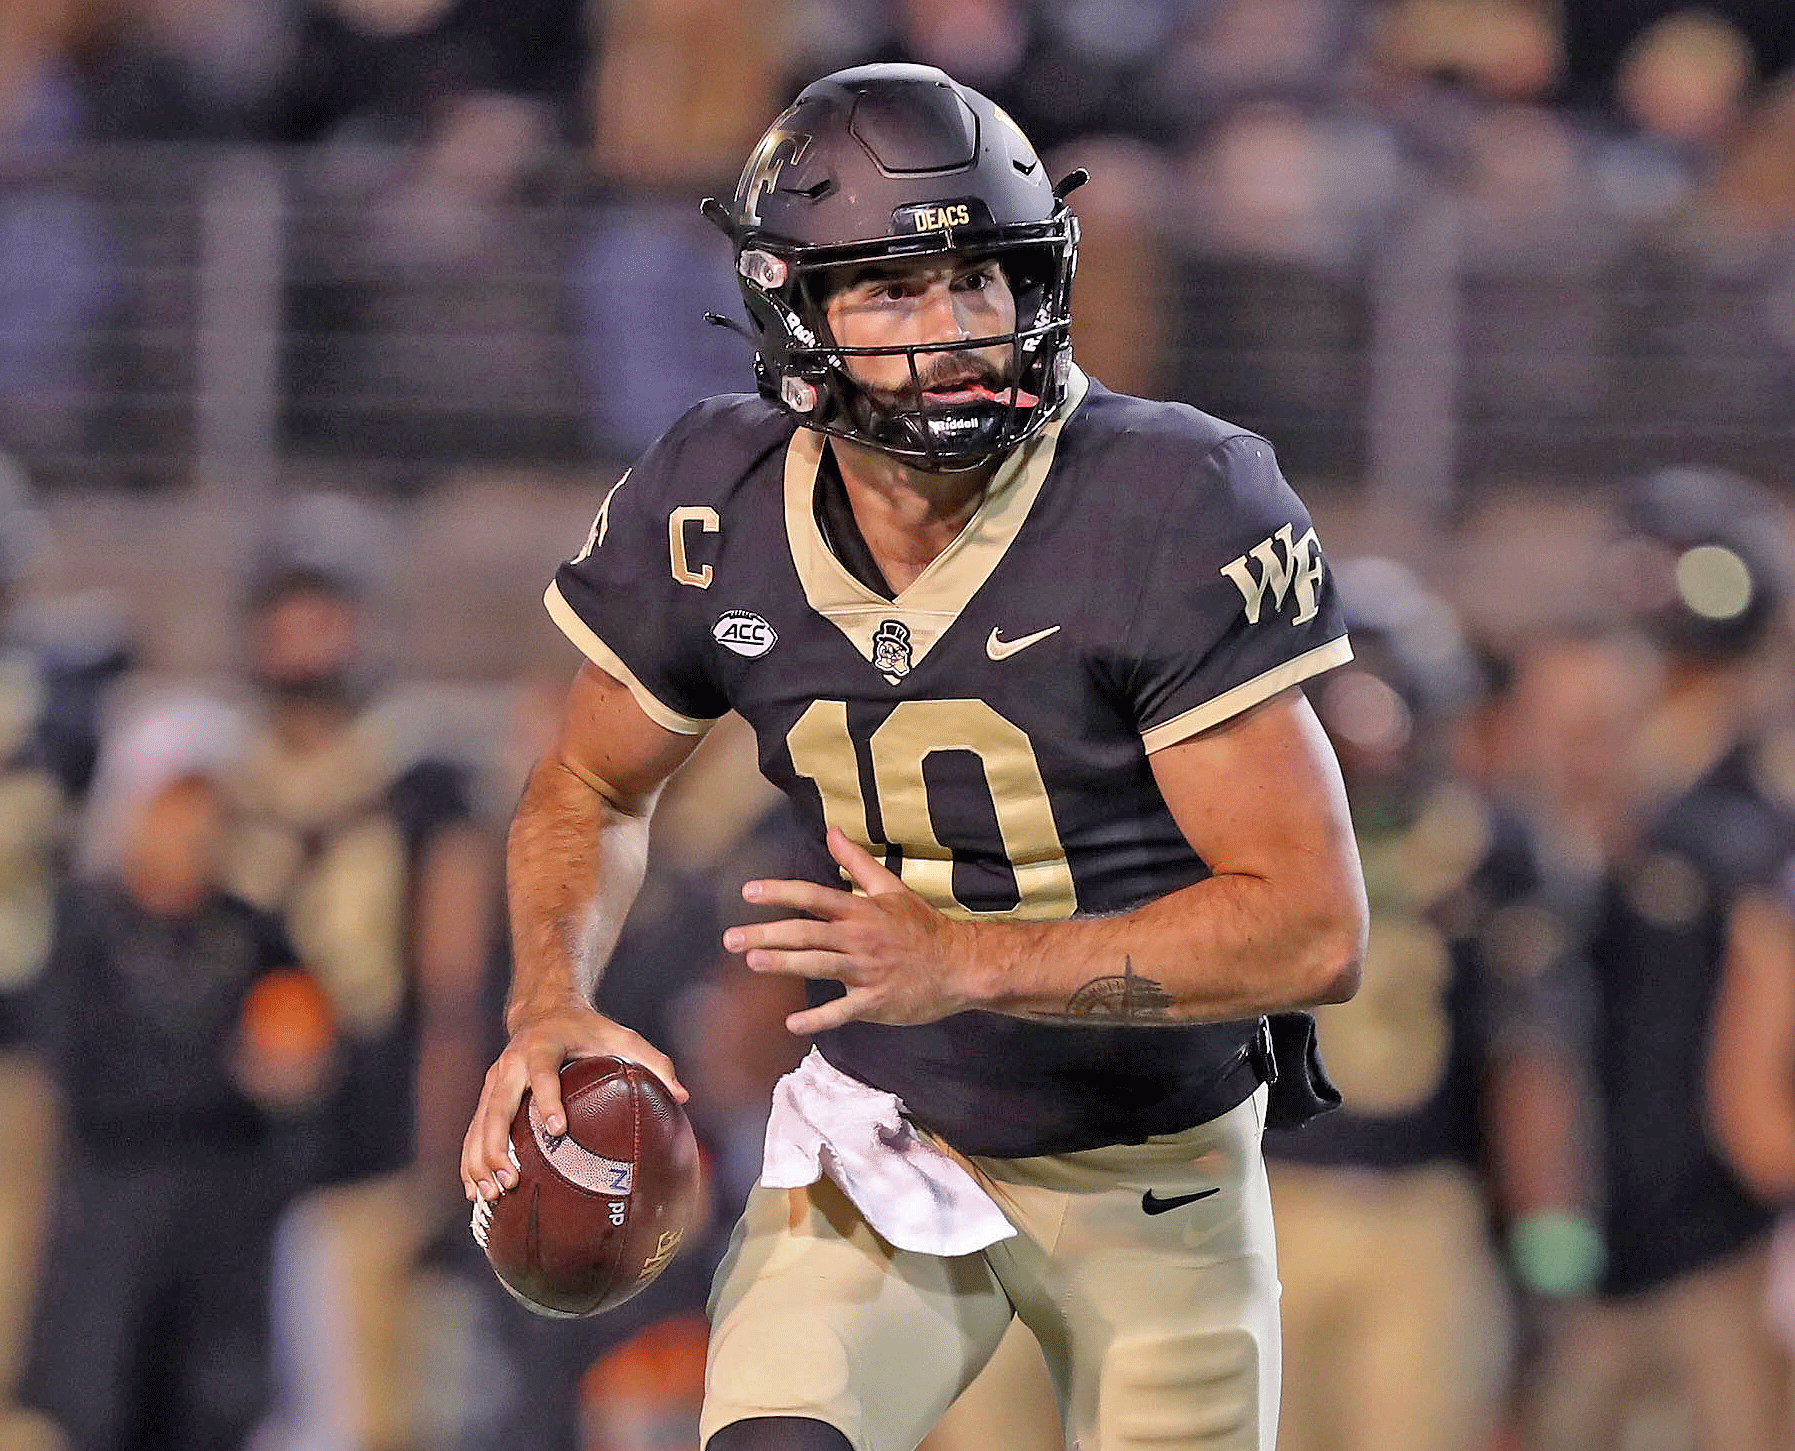 Boston College vs Wake Forest Odds, Picks and Predictions: Demon Deacons Will Roar